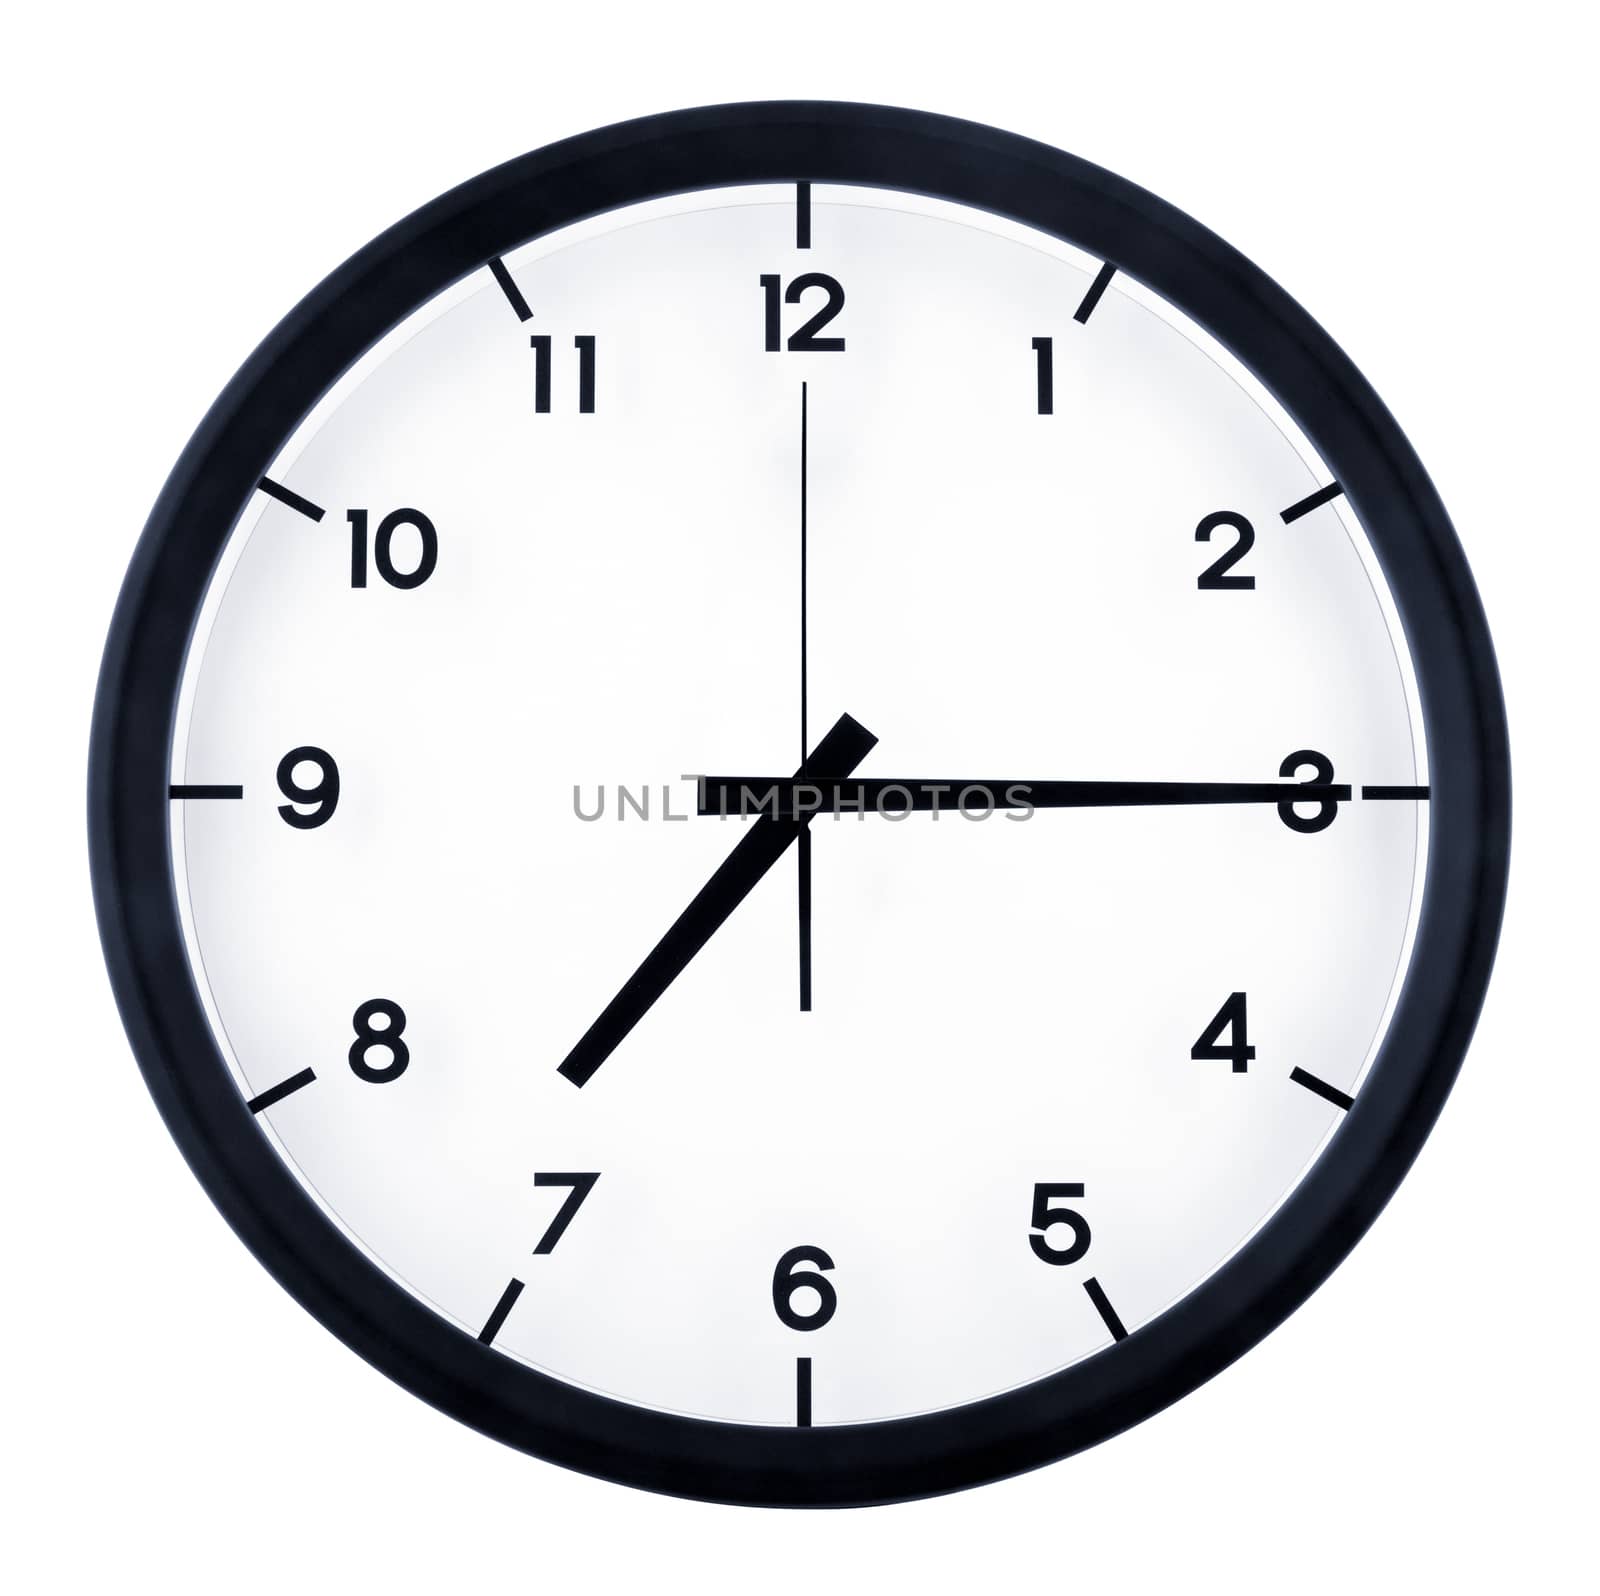 Classic analog clock pointing at seven fifteen o'clock, isolated on white background